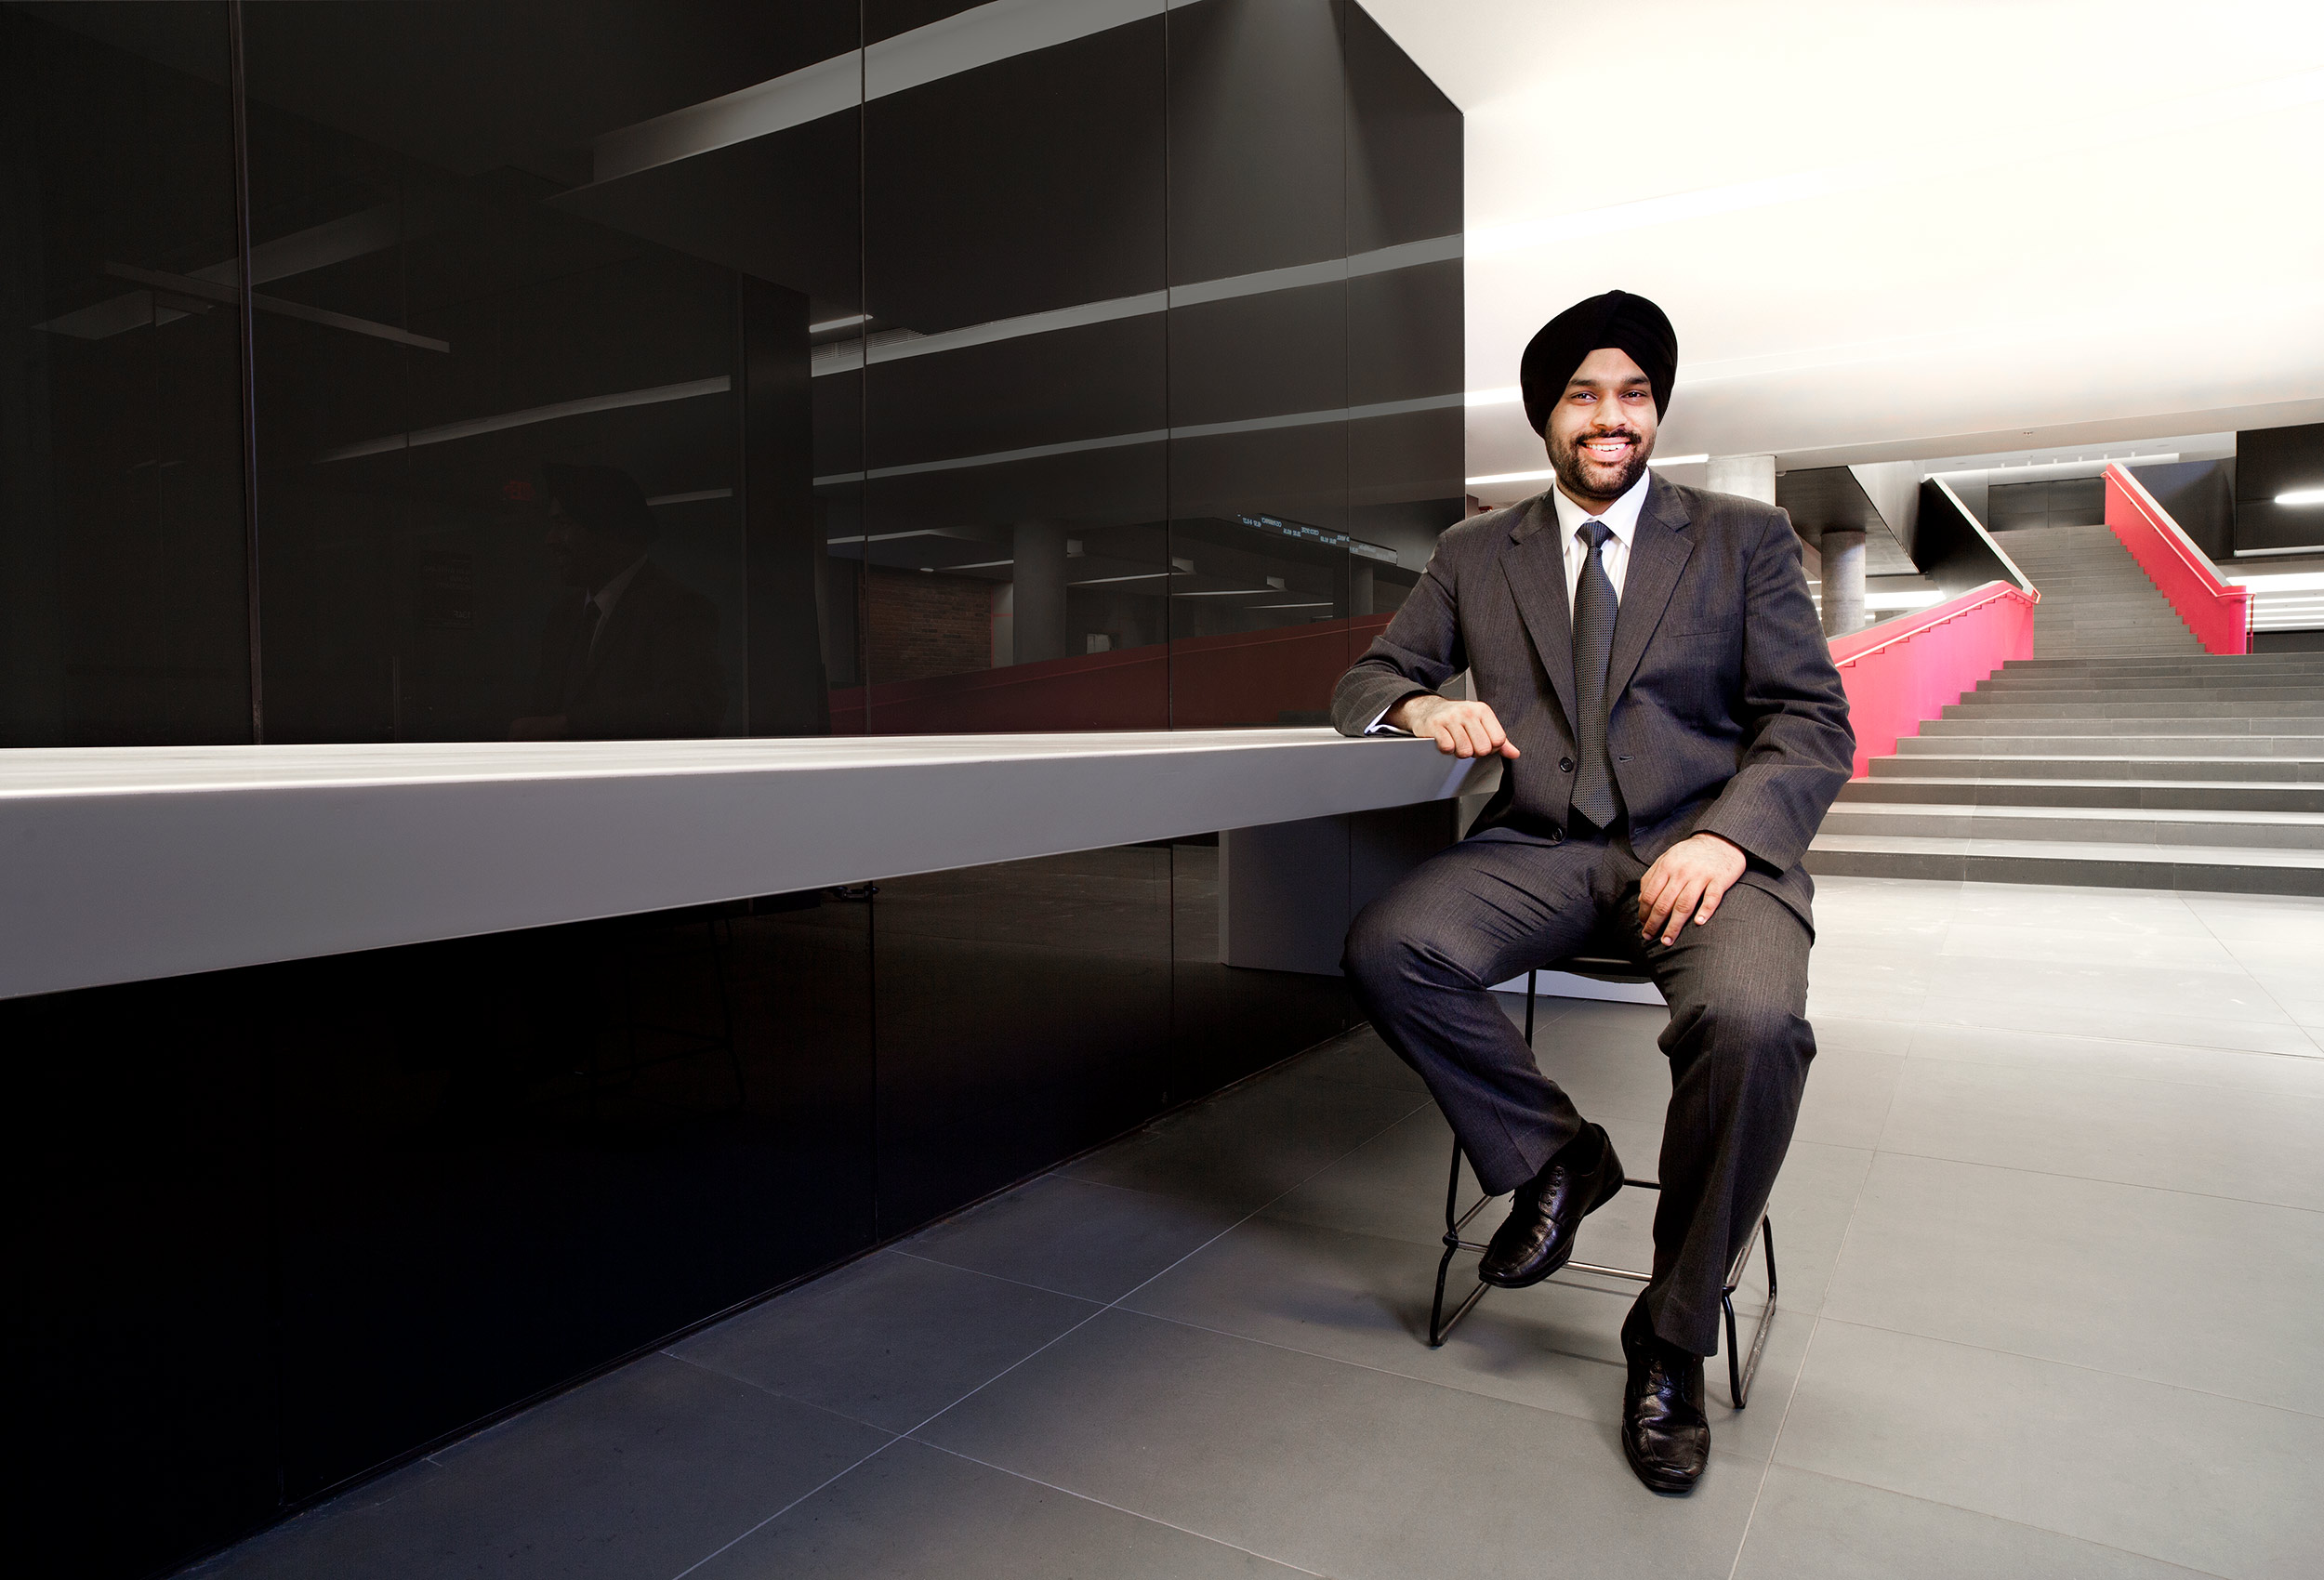 a-rotman-school-of-management-mba-student-has-his-portrait-taken-at-the-university-of-toronto-campus